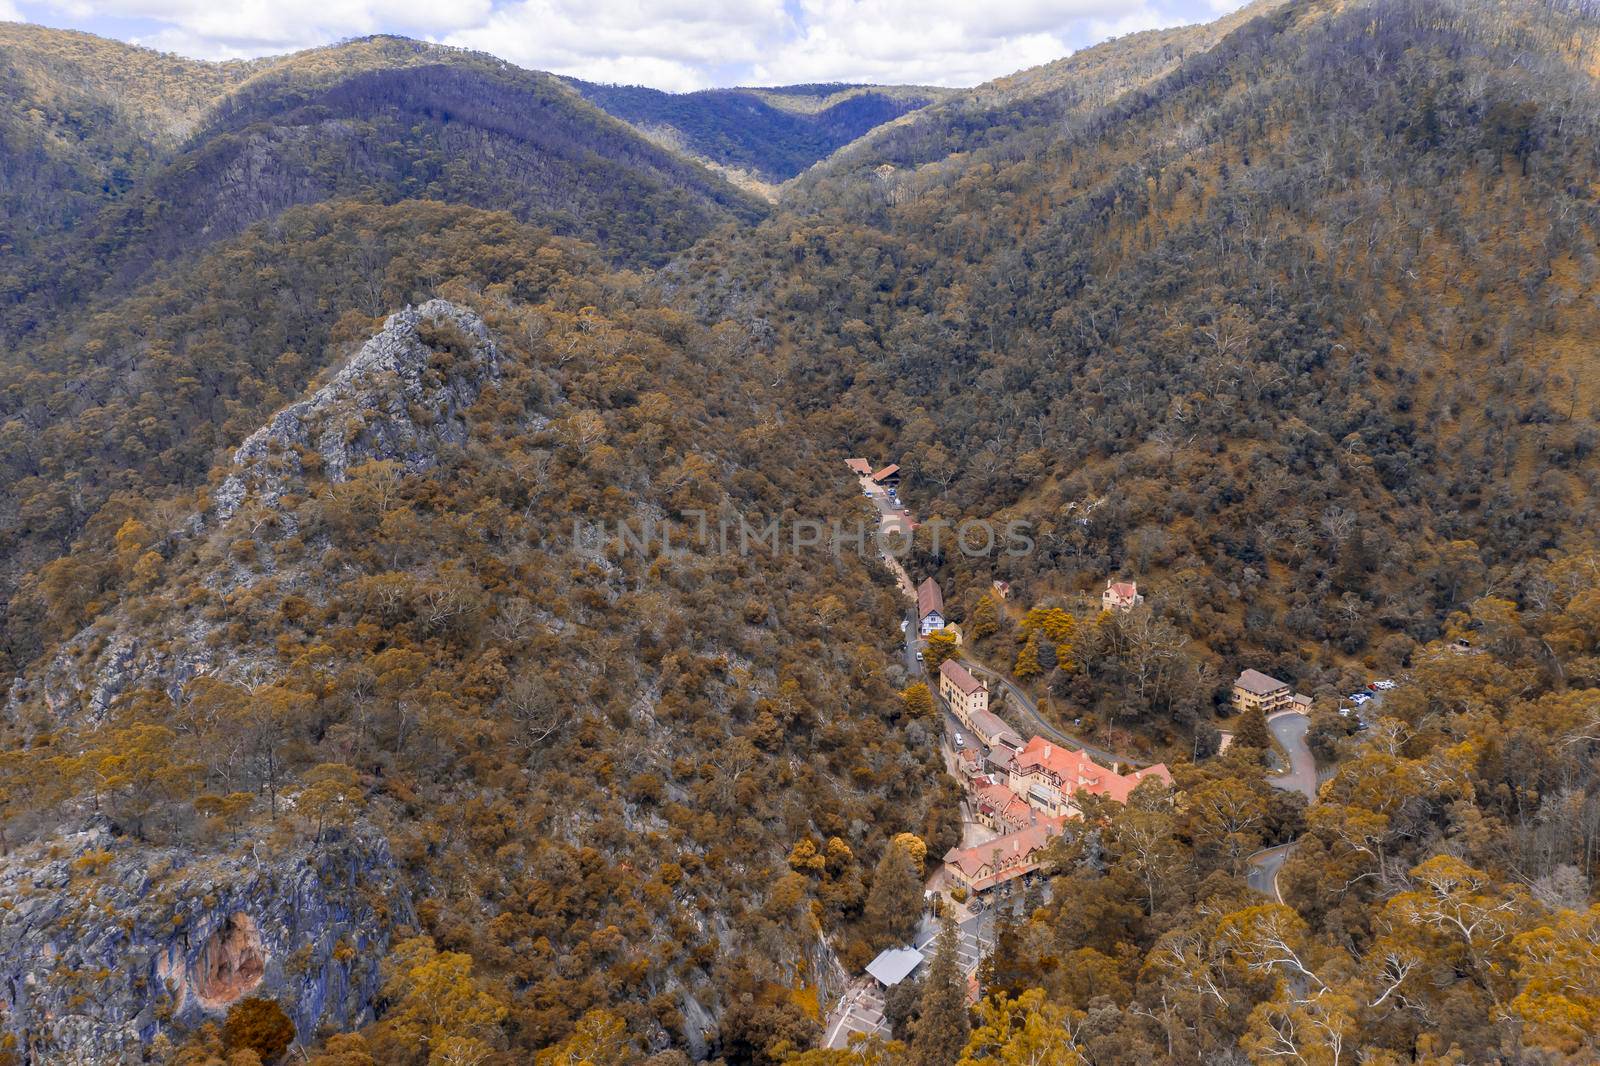 Aerial view of the Jenolan Caves village and bushfire forest regeneration in the Central Tablelands in regional New South Wales in Australia